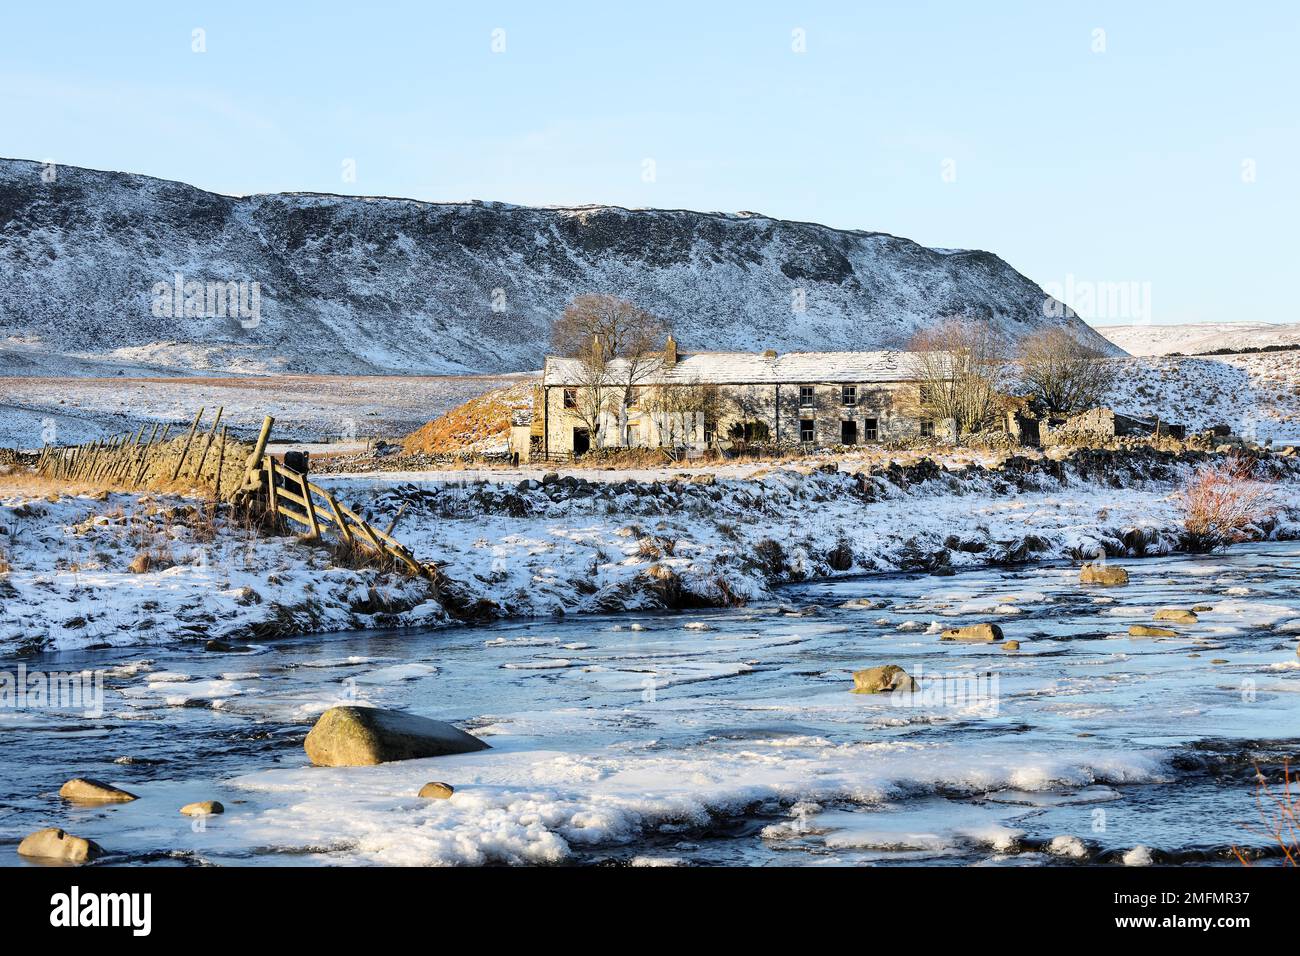 The imposing crags of Cronkley Fell and the old farmstead of Wheysike House viewed across Harwood Beck from the Pennine Way in winter, Forest-in-Teesd Stock Photo